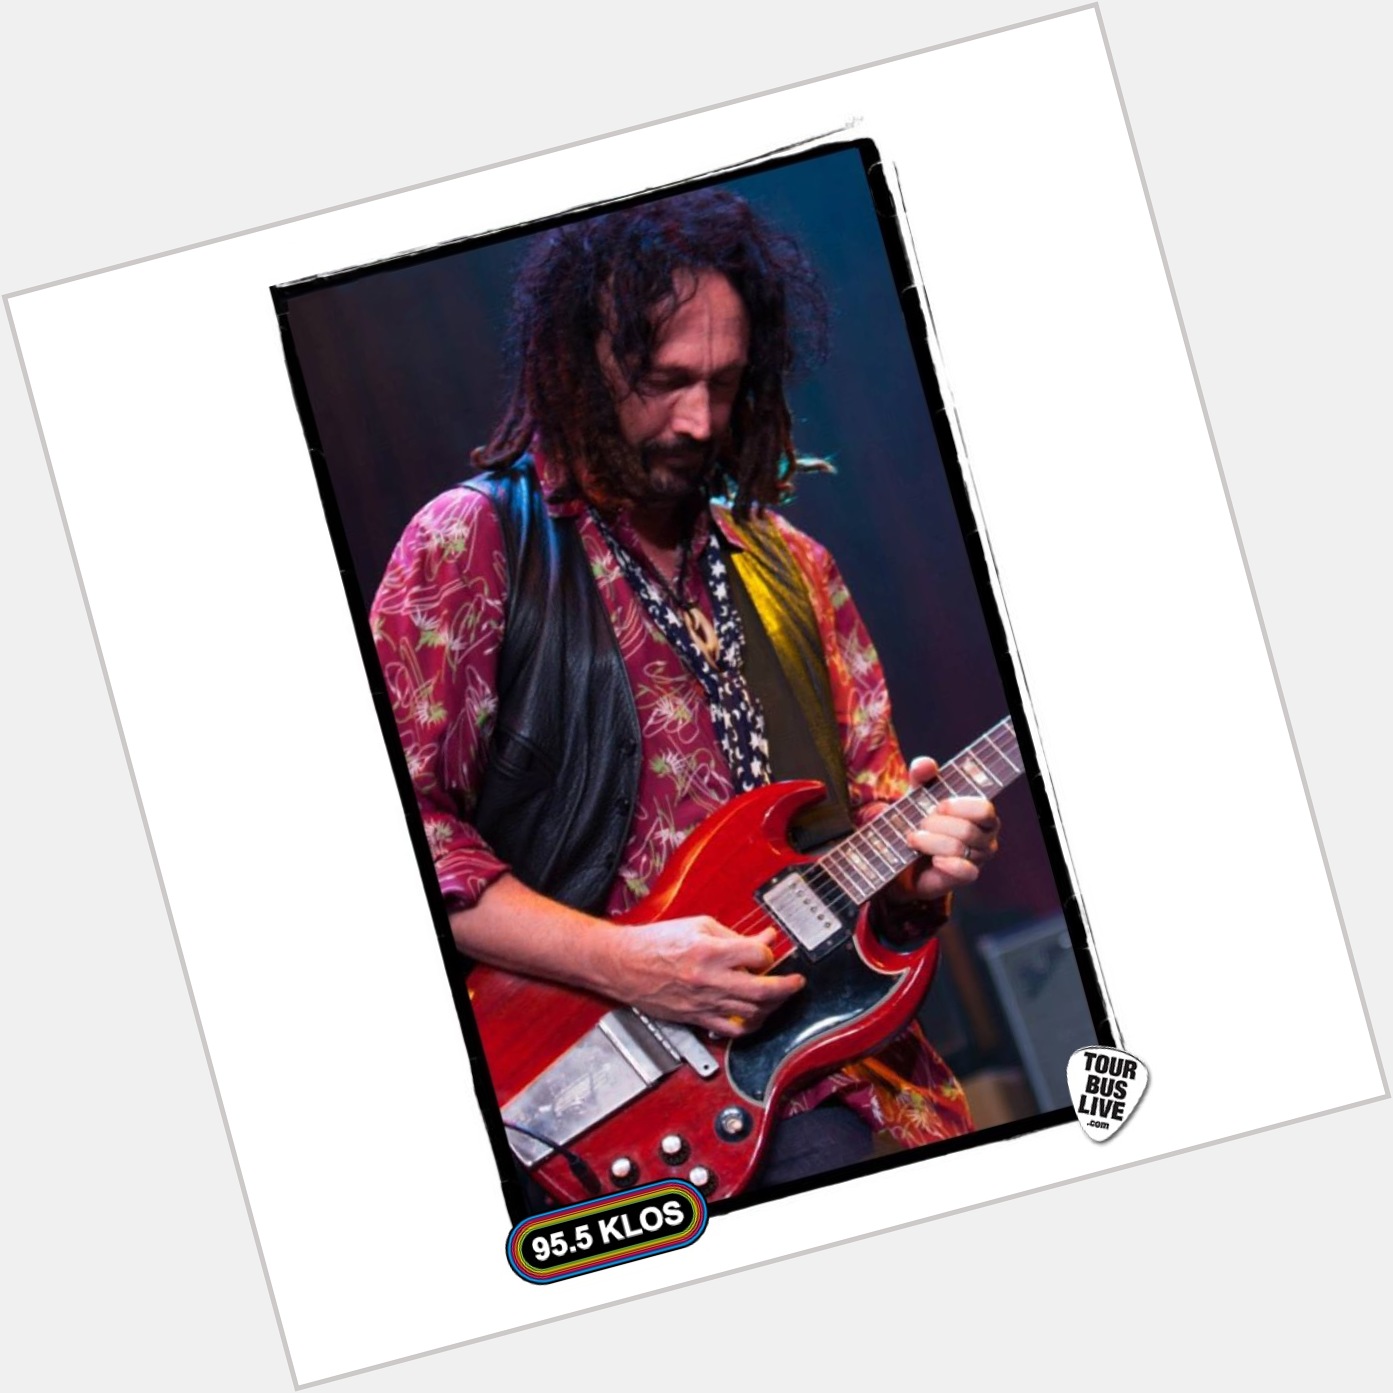 Wishing a Happy Birthday today to guitarist Mike Campbell.    mikecampbellofficial 